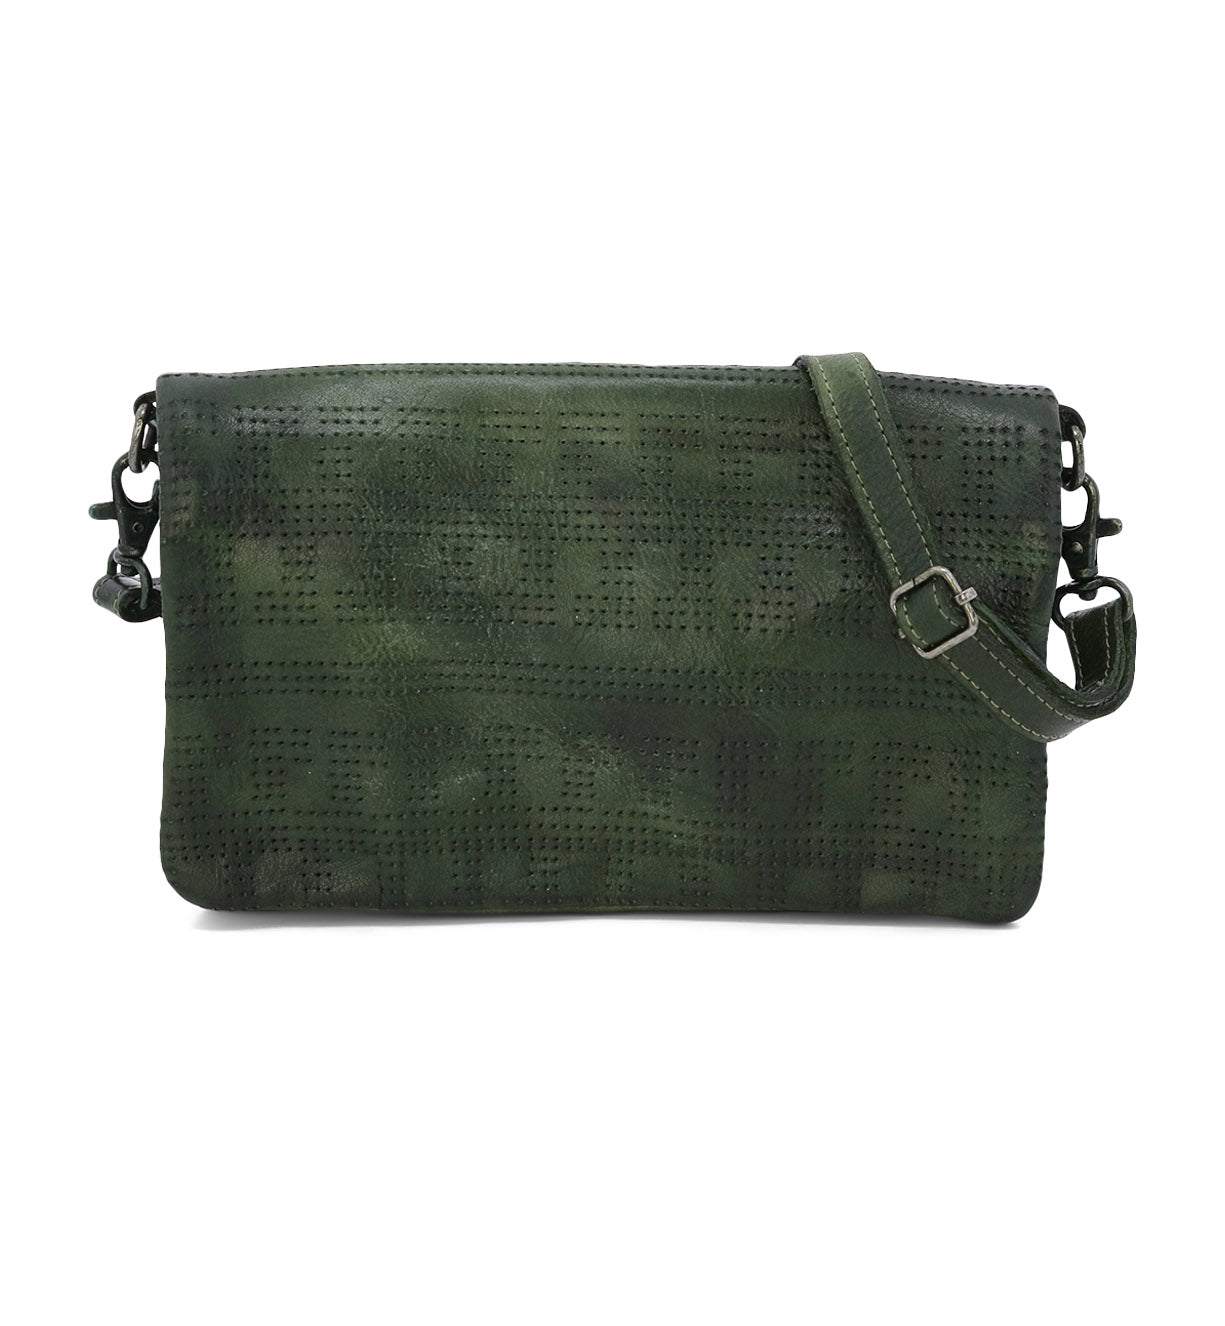 A versatile green leather cross body bag by Bed Stu with a strap.